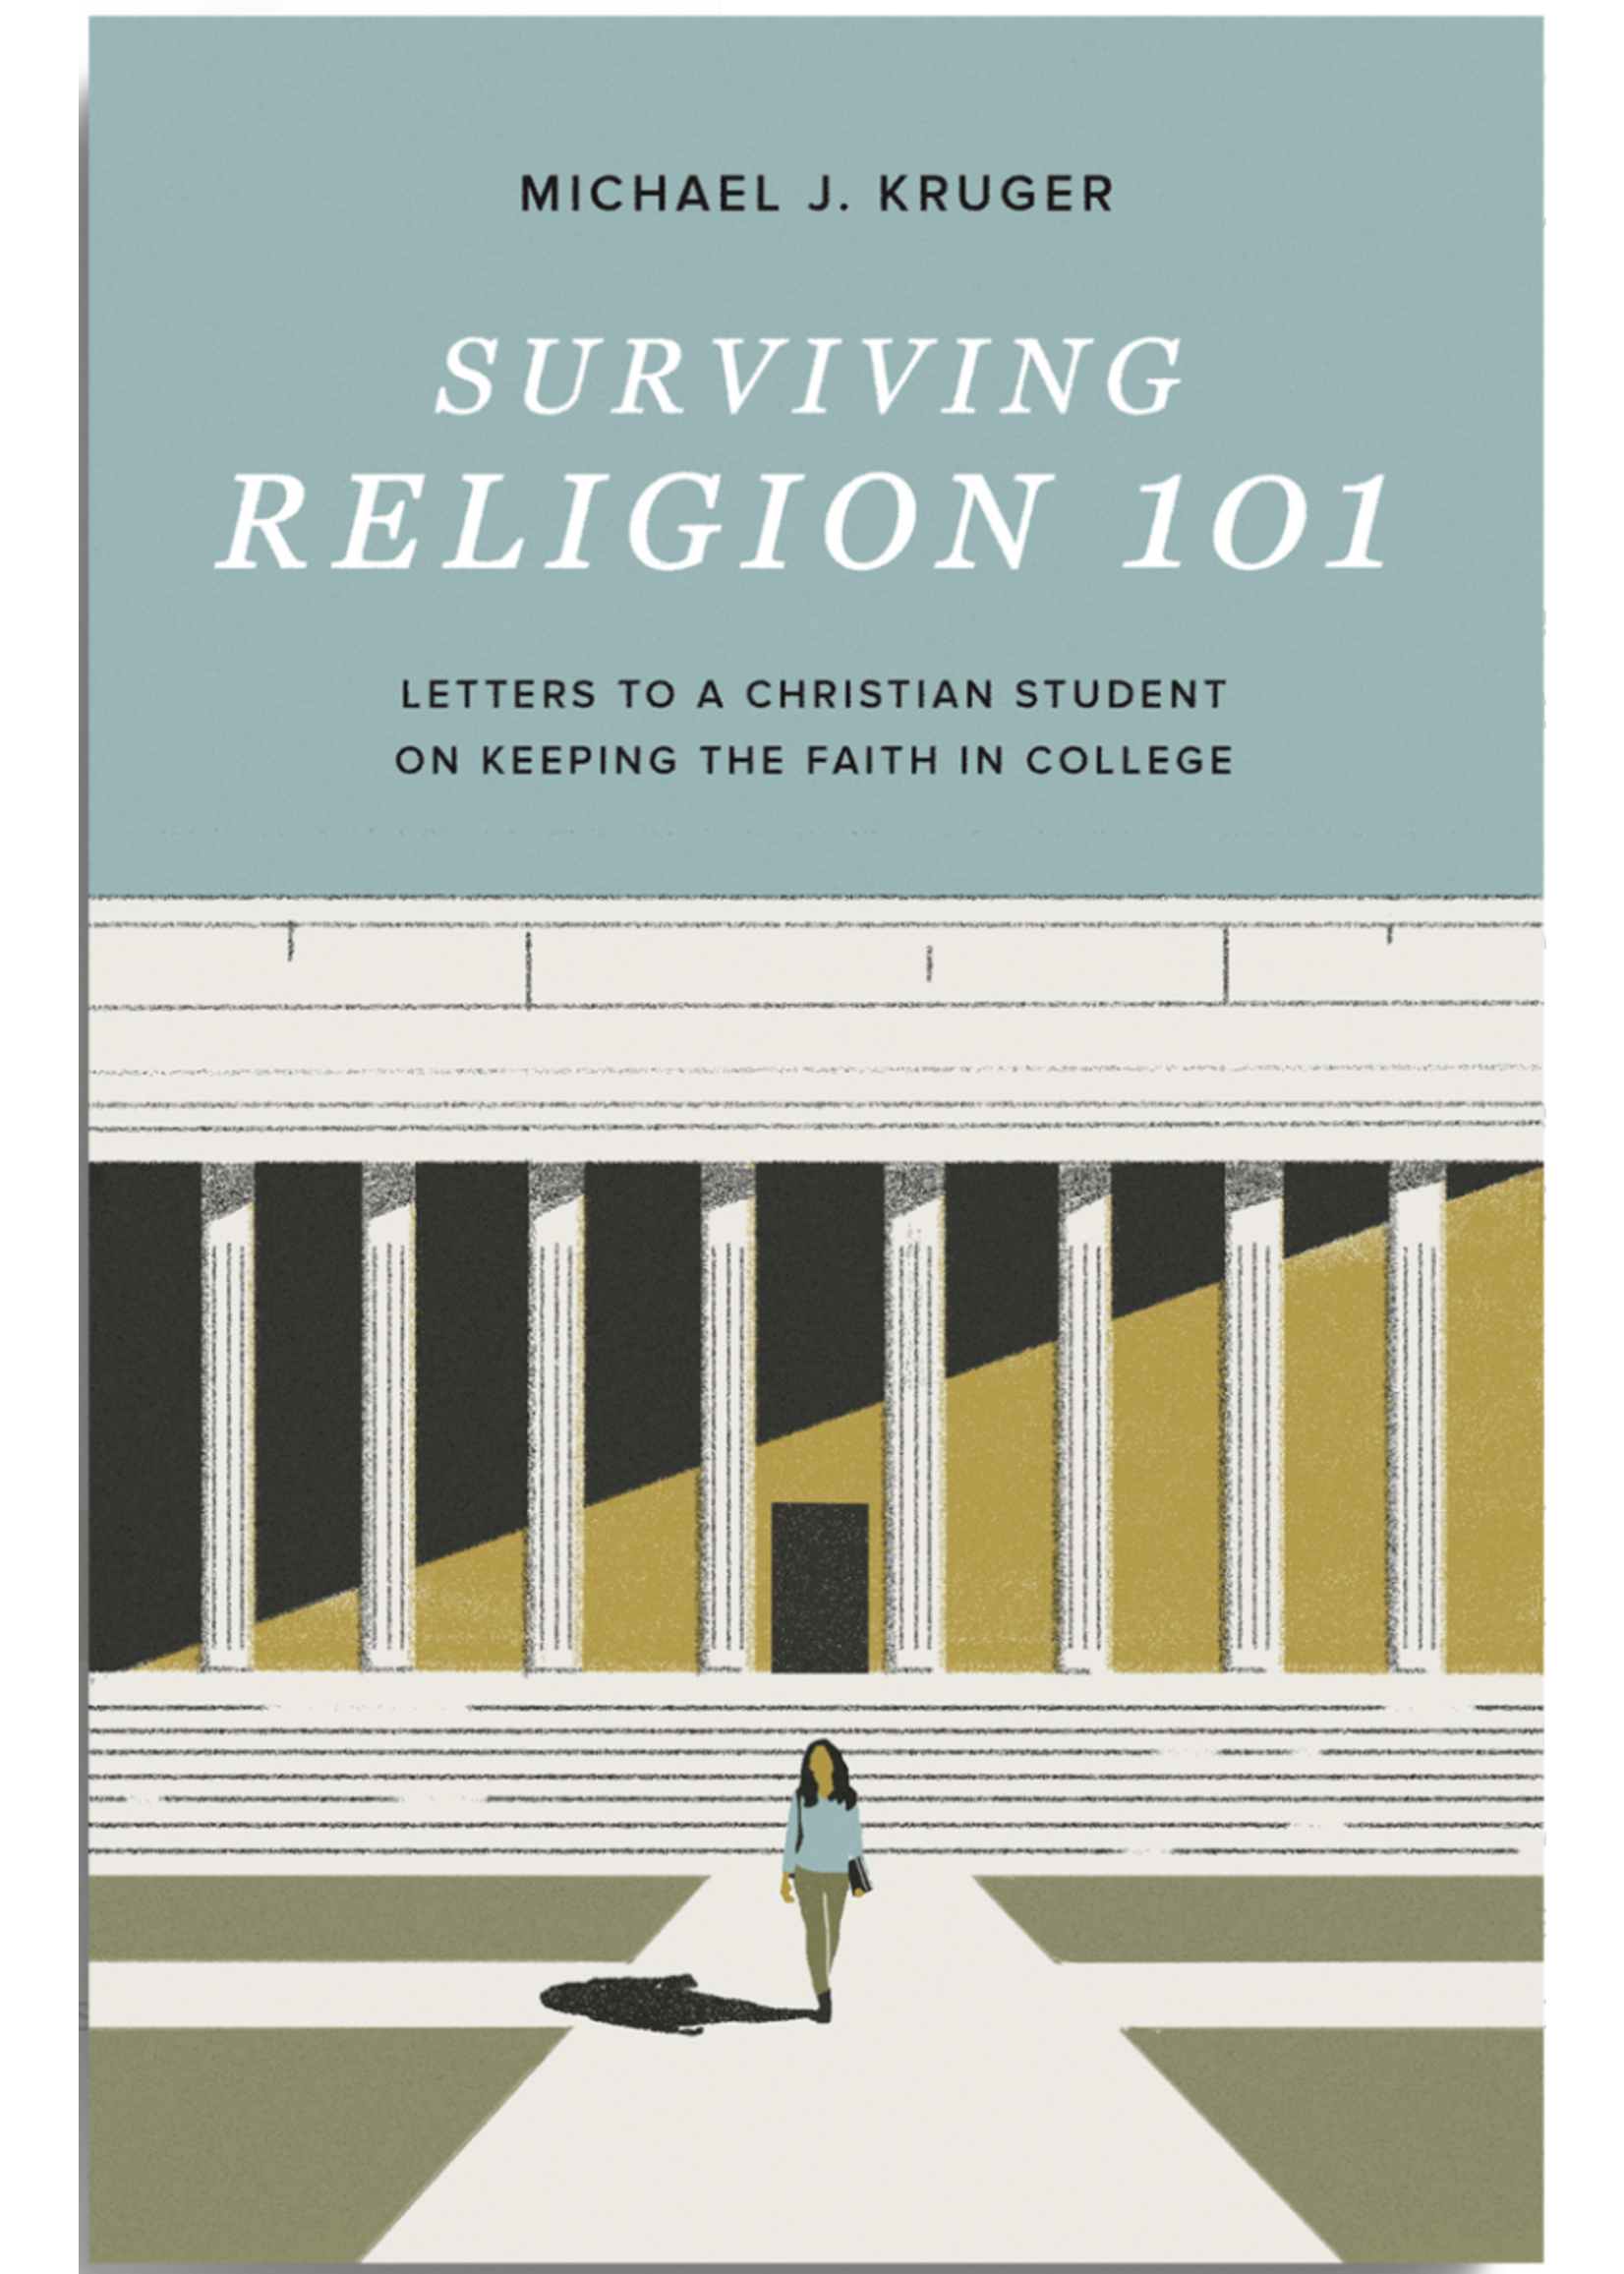 Kruger, Michael Surviving Religion 101: Letters to a Christian Student on Keeping the Faith in College